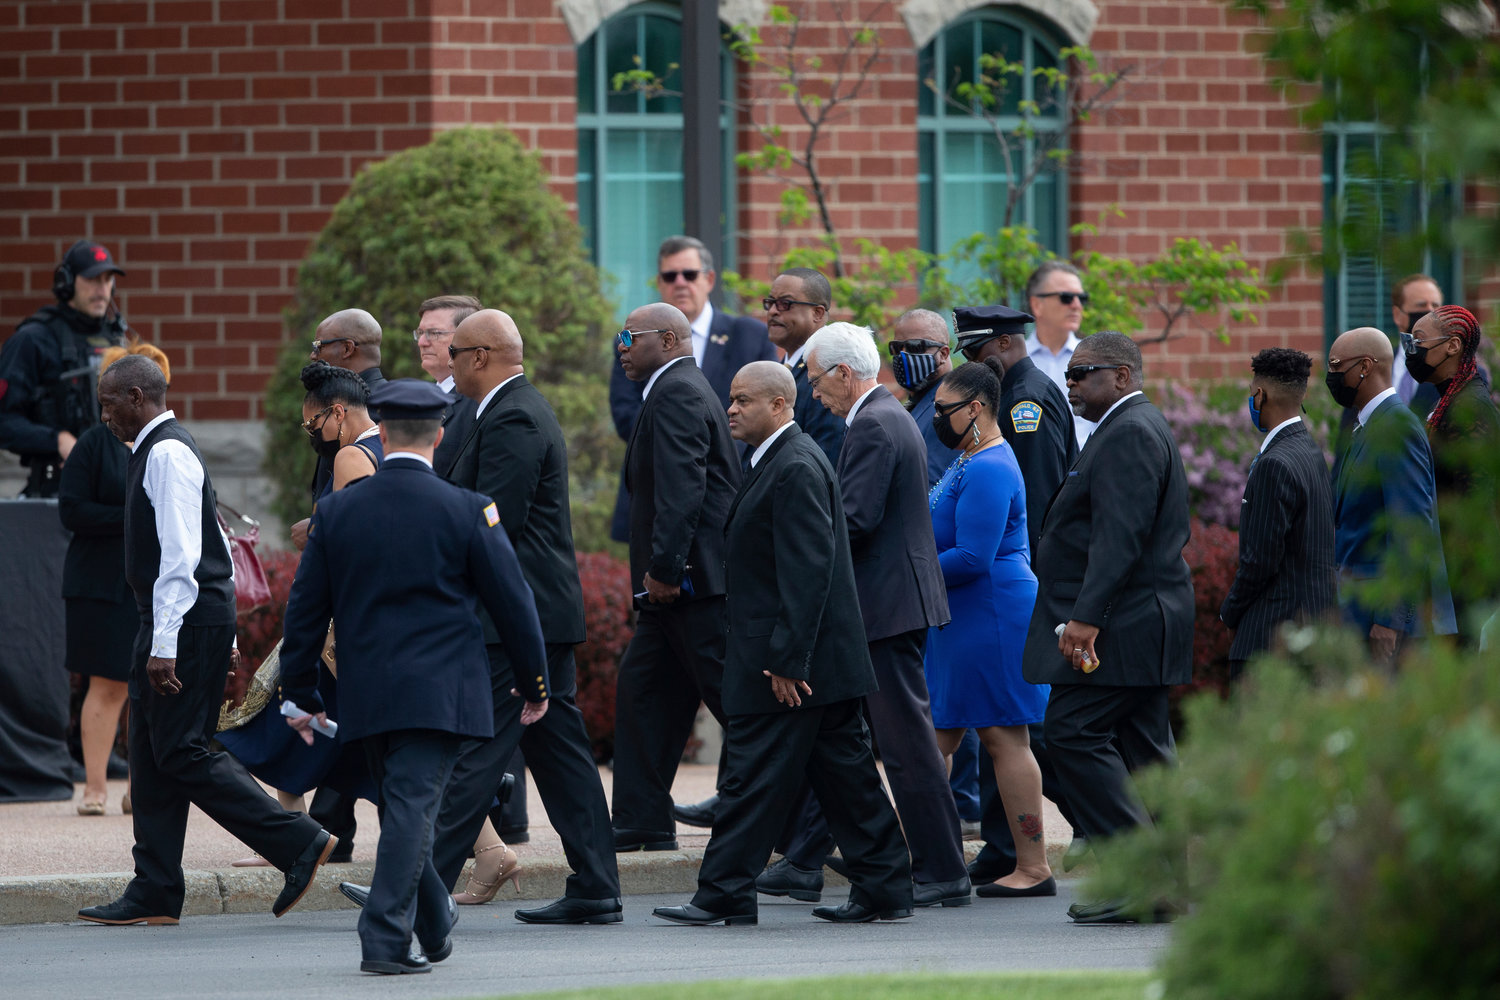 The family of Aaron Salter Jr. walks by police officers before a funeral service for Salter Jr. at The Chapel at Crosspoint on Wednesday, May 25, 2022, in Getzville, N.Y. Salter Jr. was killed in the Buffalo supermarket shooting on May 14. (AP Photo/Joshua Bessex)